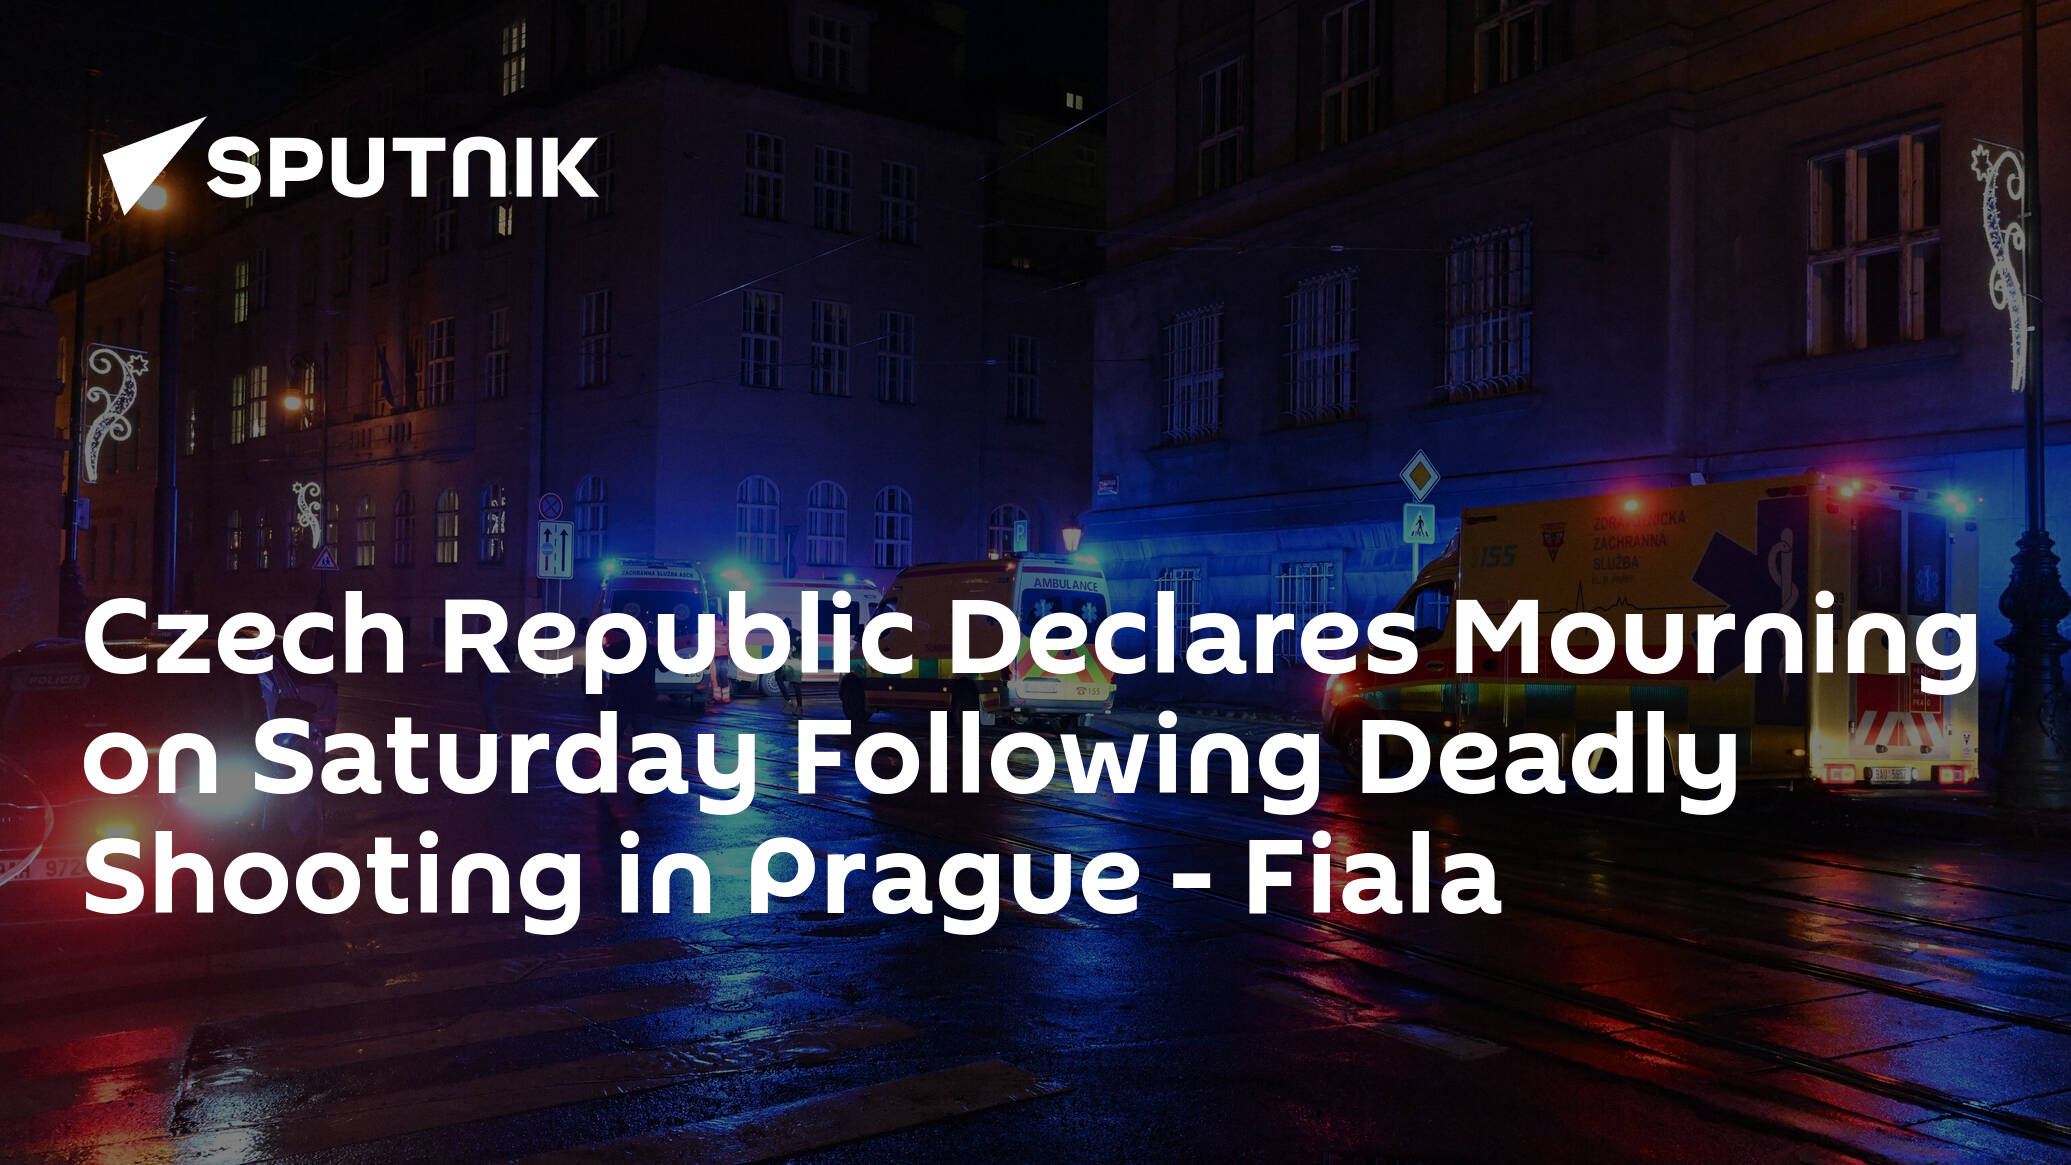 Czech Republic Declares Mourning on Saturday Following Deadly Shooting in Prague – Fiala